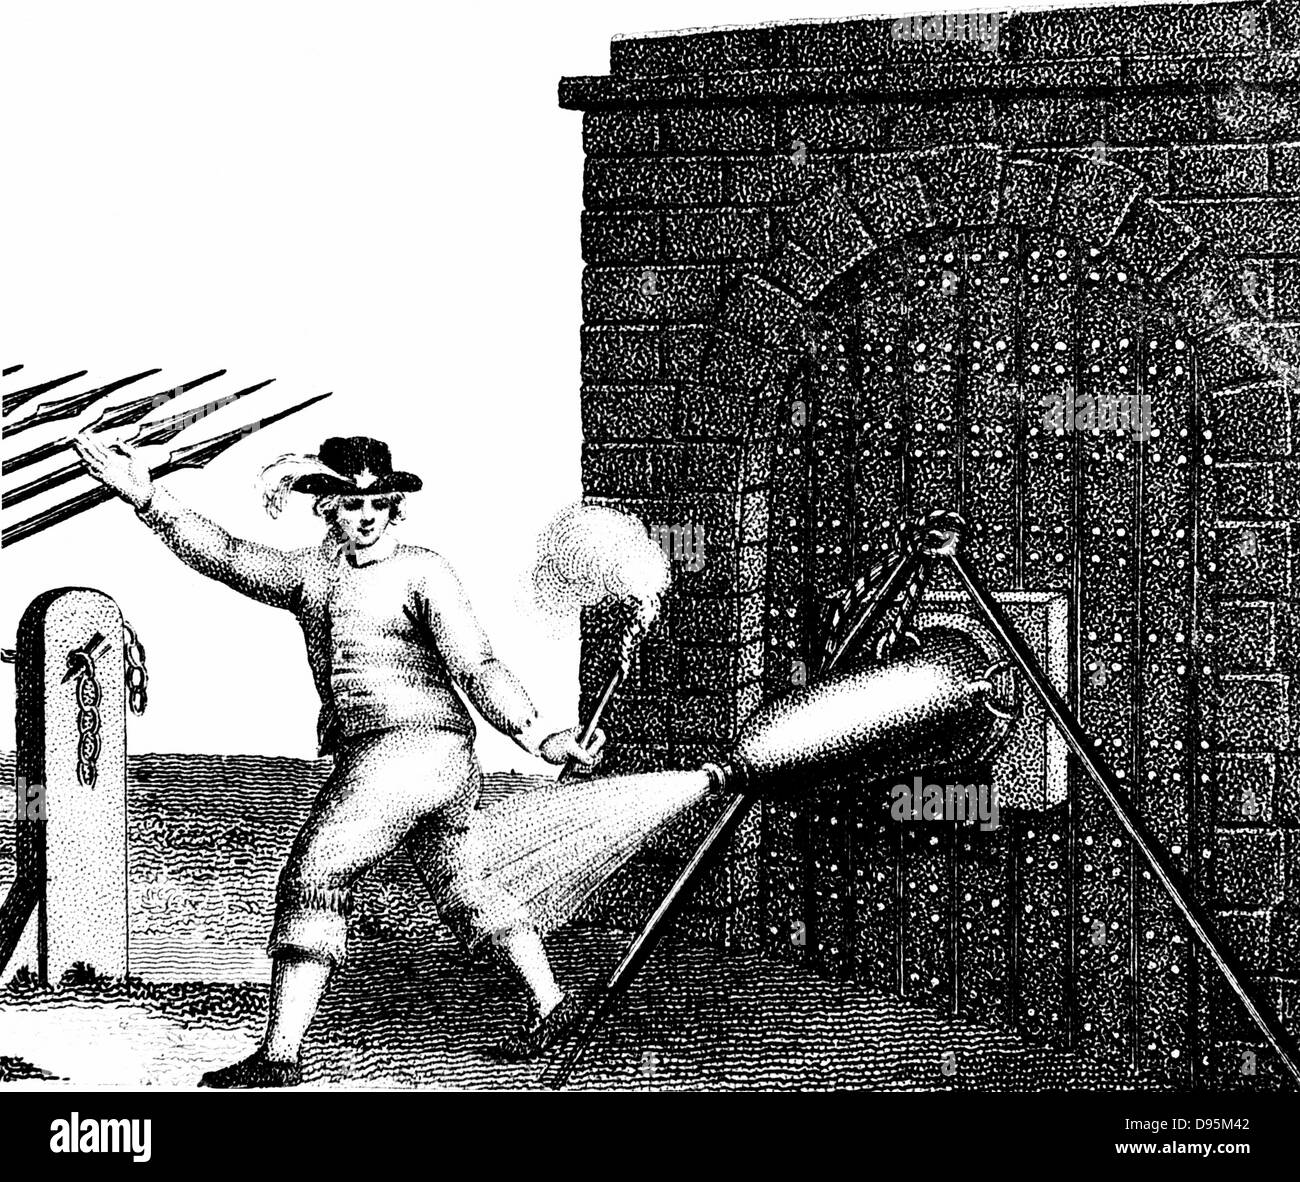 Normal method of applying a petard (explosive device) to the gate of a fortress. The fuse has just been lit and the Fusilier is retreating quickly in order not to be 'hoist with his own petard'. Stipple engraving c1800. Stock Photo